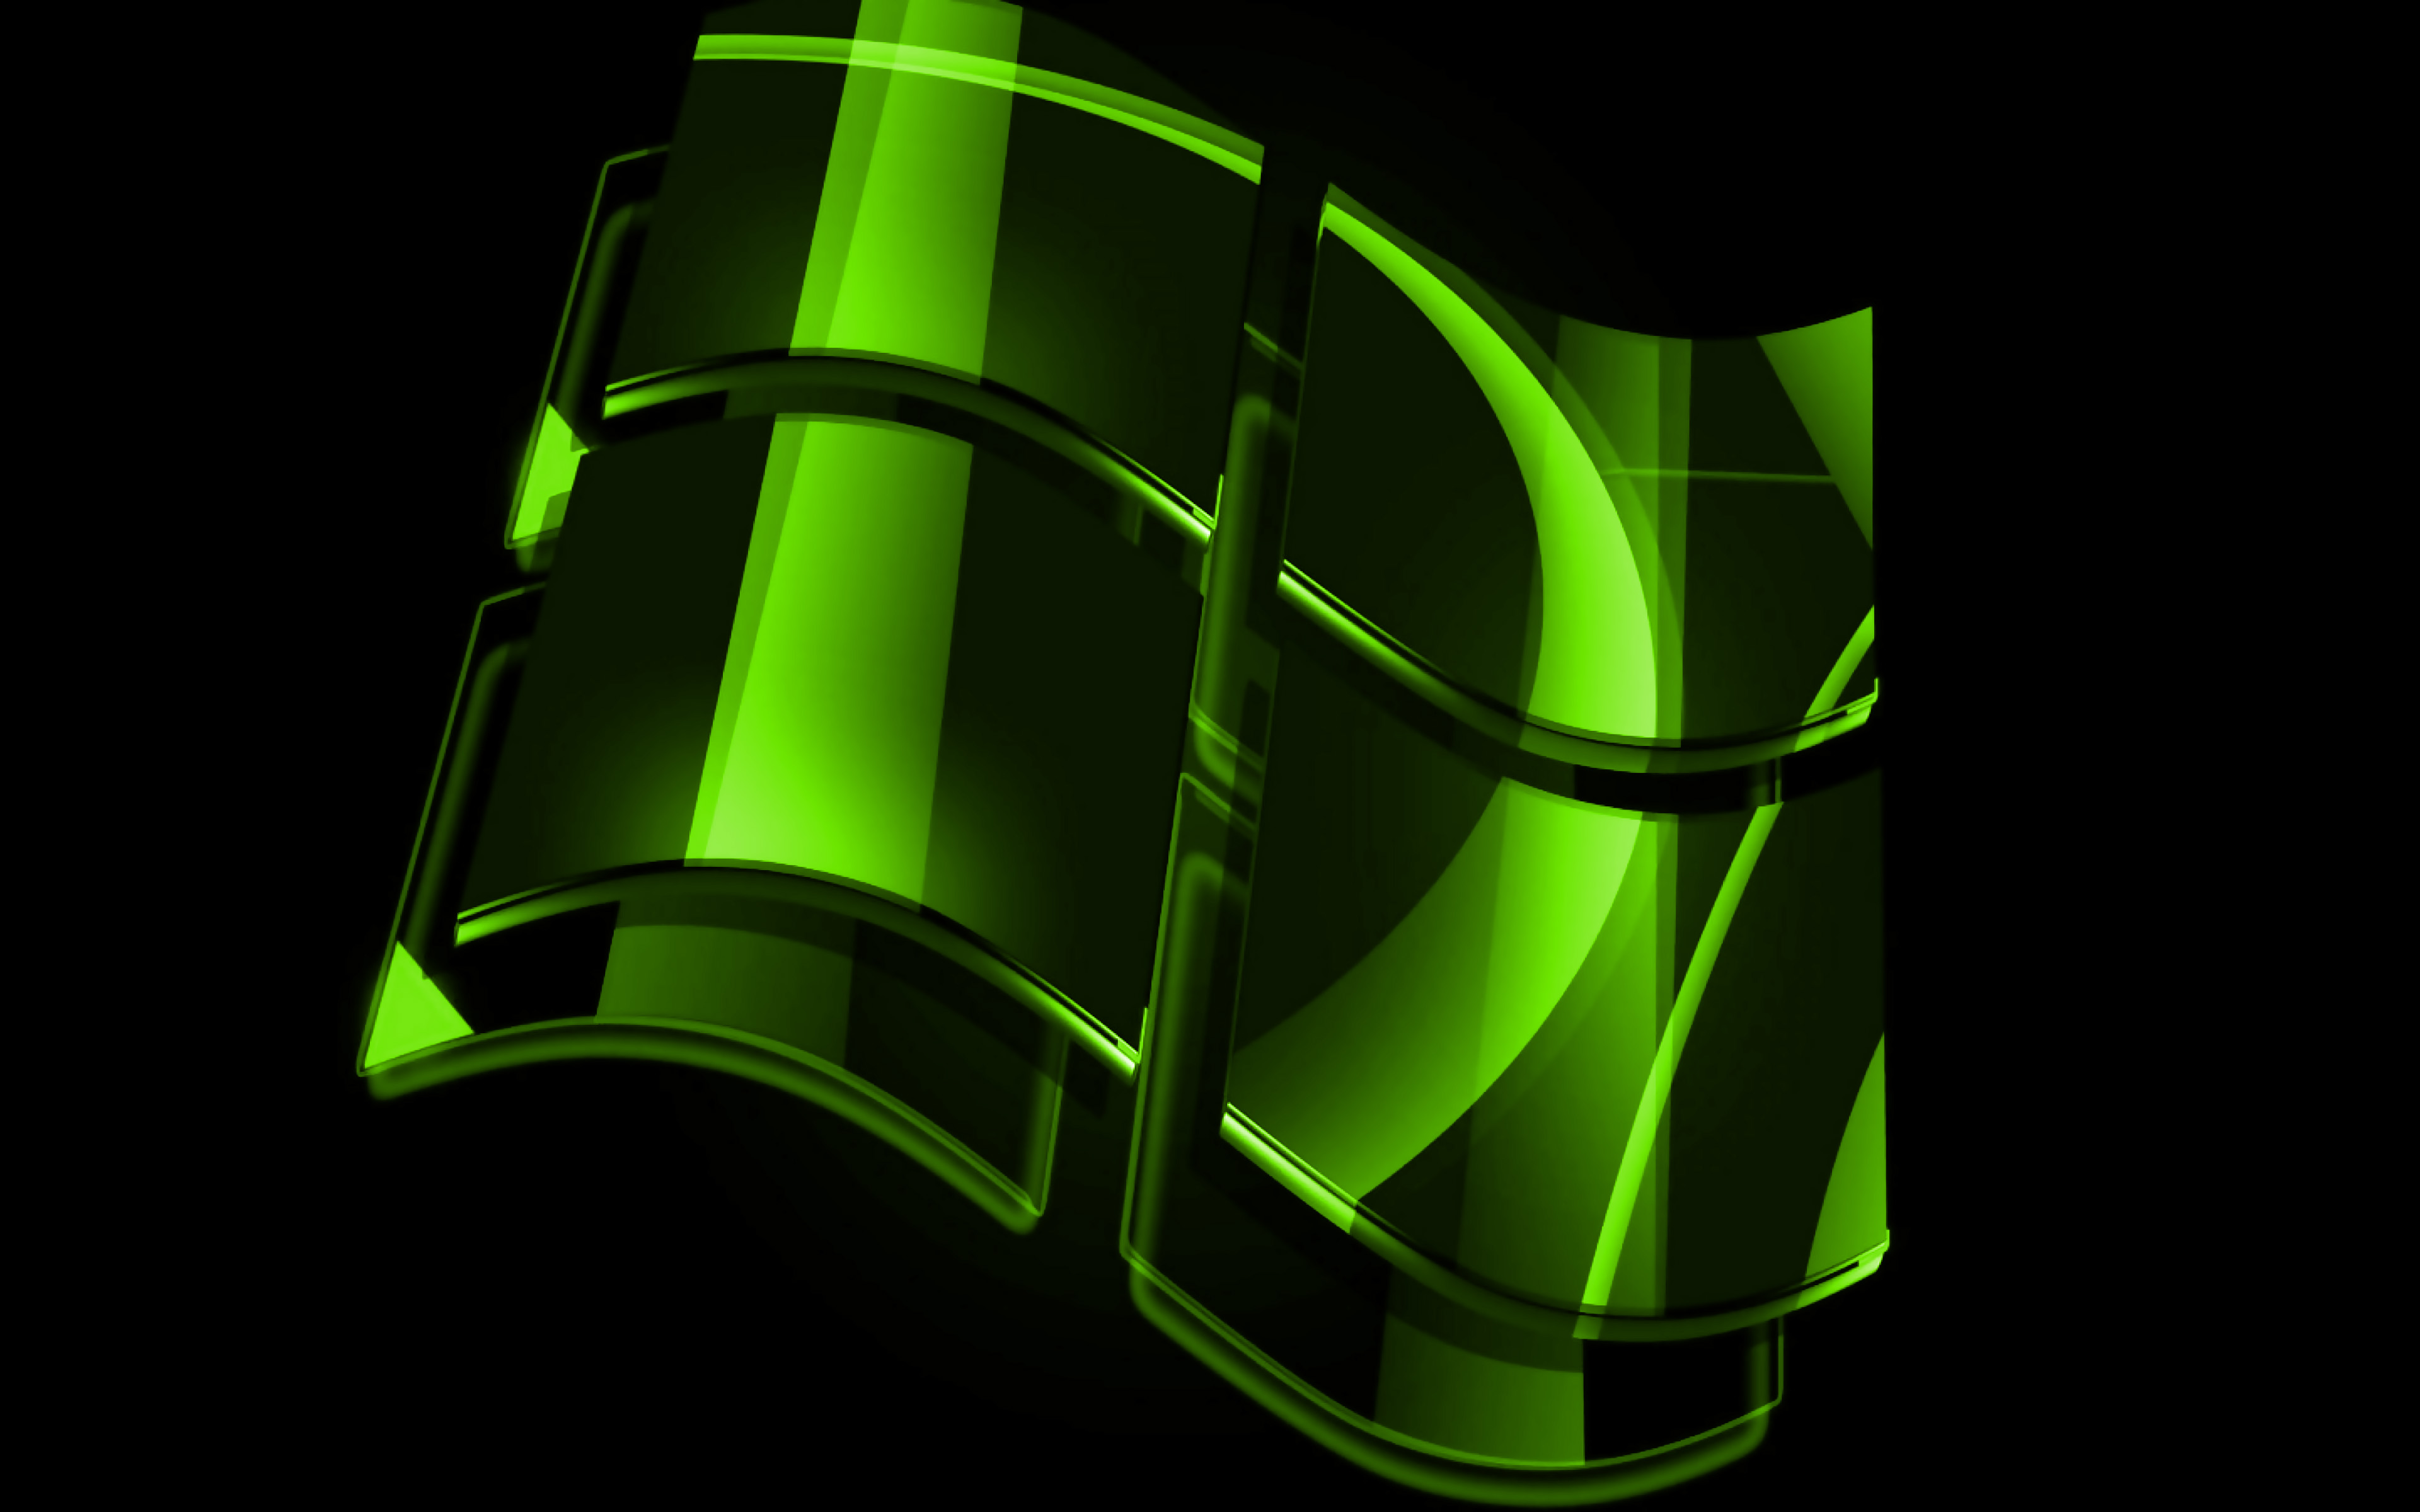 Download wallpapers 4k, Windows lime logo, lime backgrounds, OS, Windows  glass logo, artwork, Windows 3D logo, Windows for desktop with resolution  3840x2400. High Quality HD pictures wallpapers